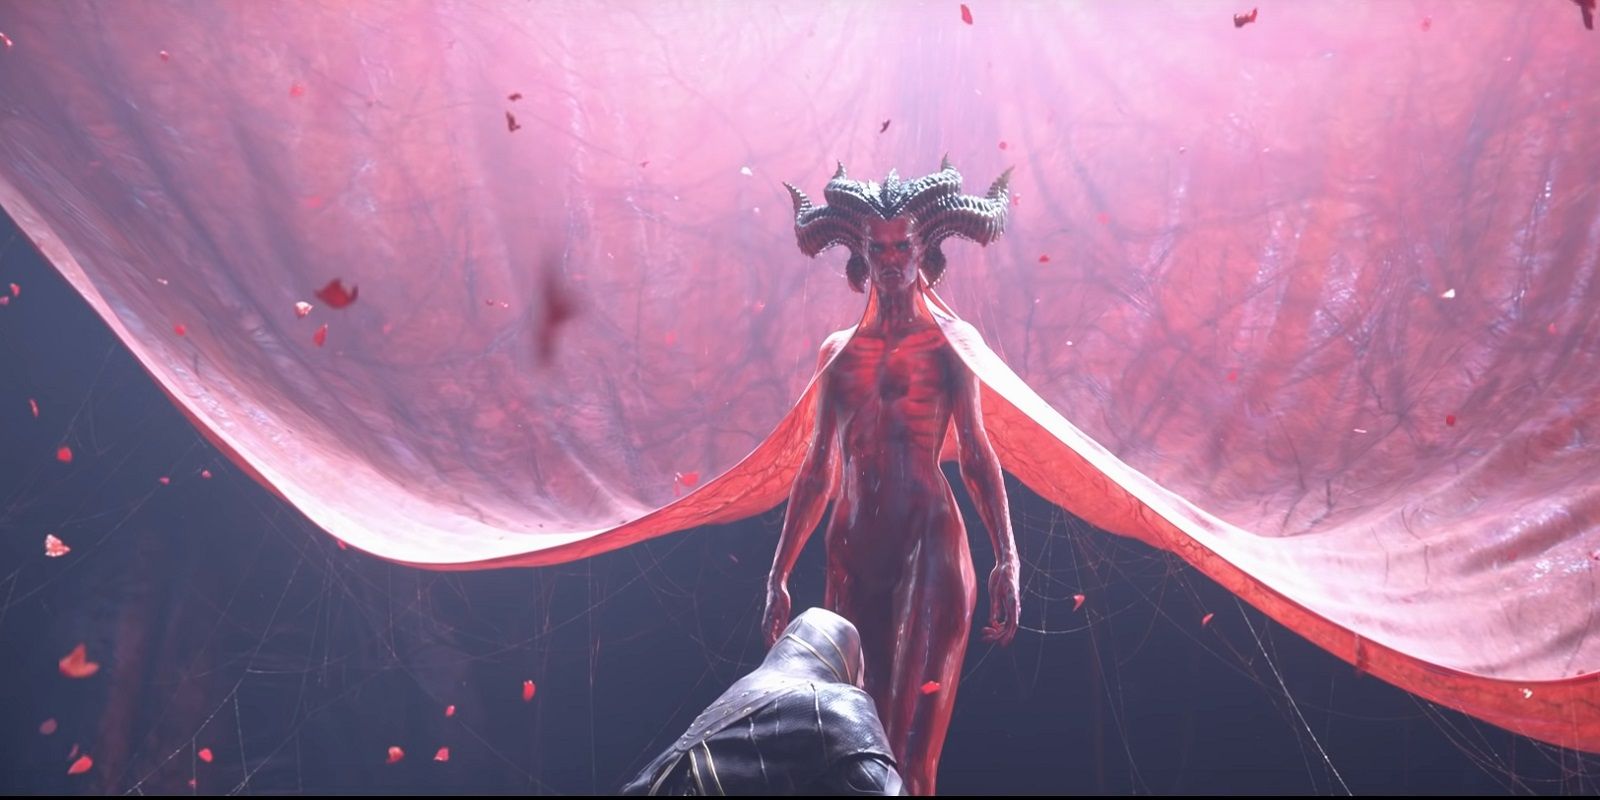 Lilith is summoned from exile in the Diablo 4 announcement cinematic trailer